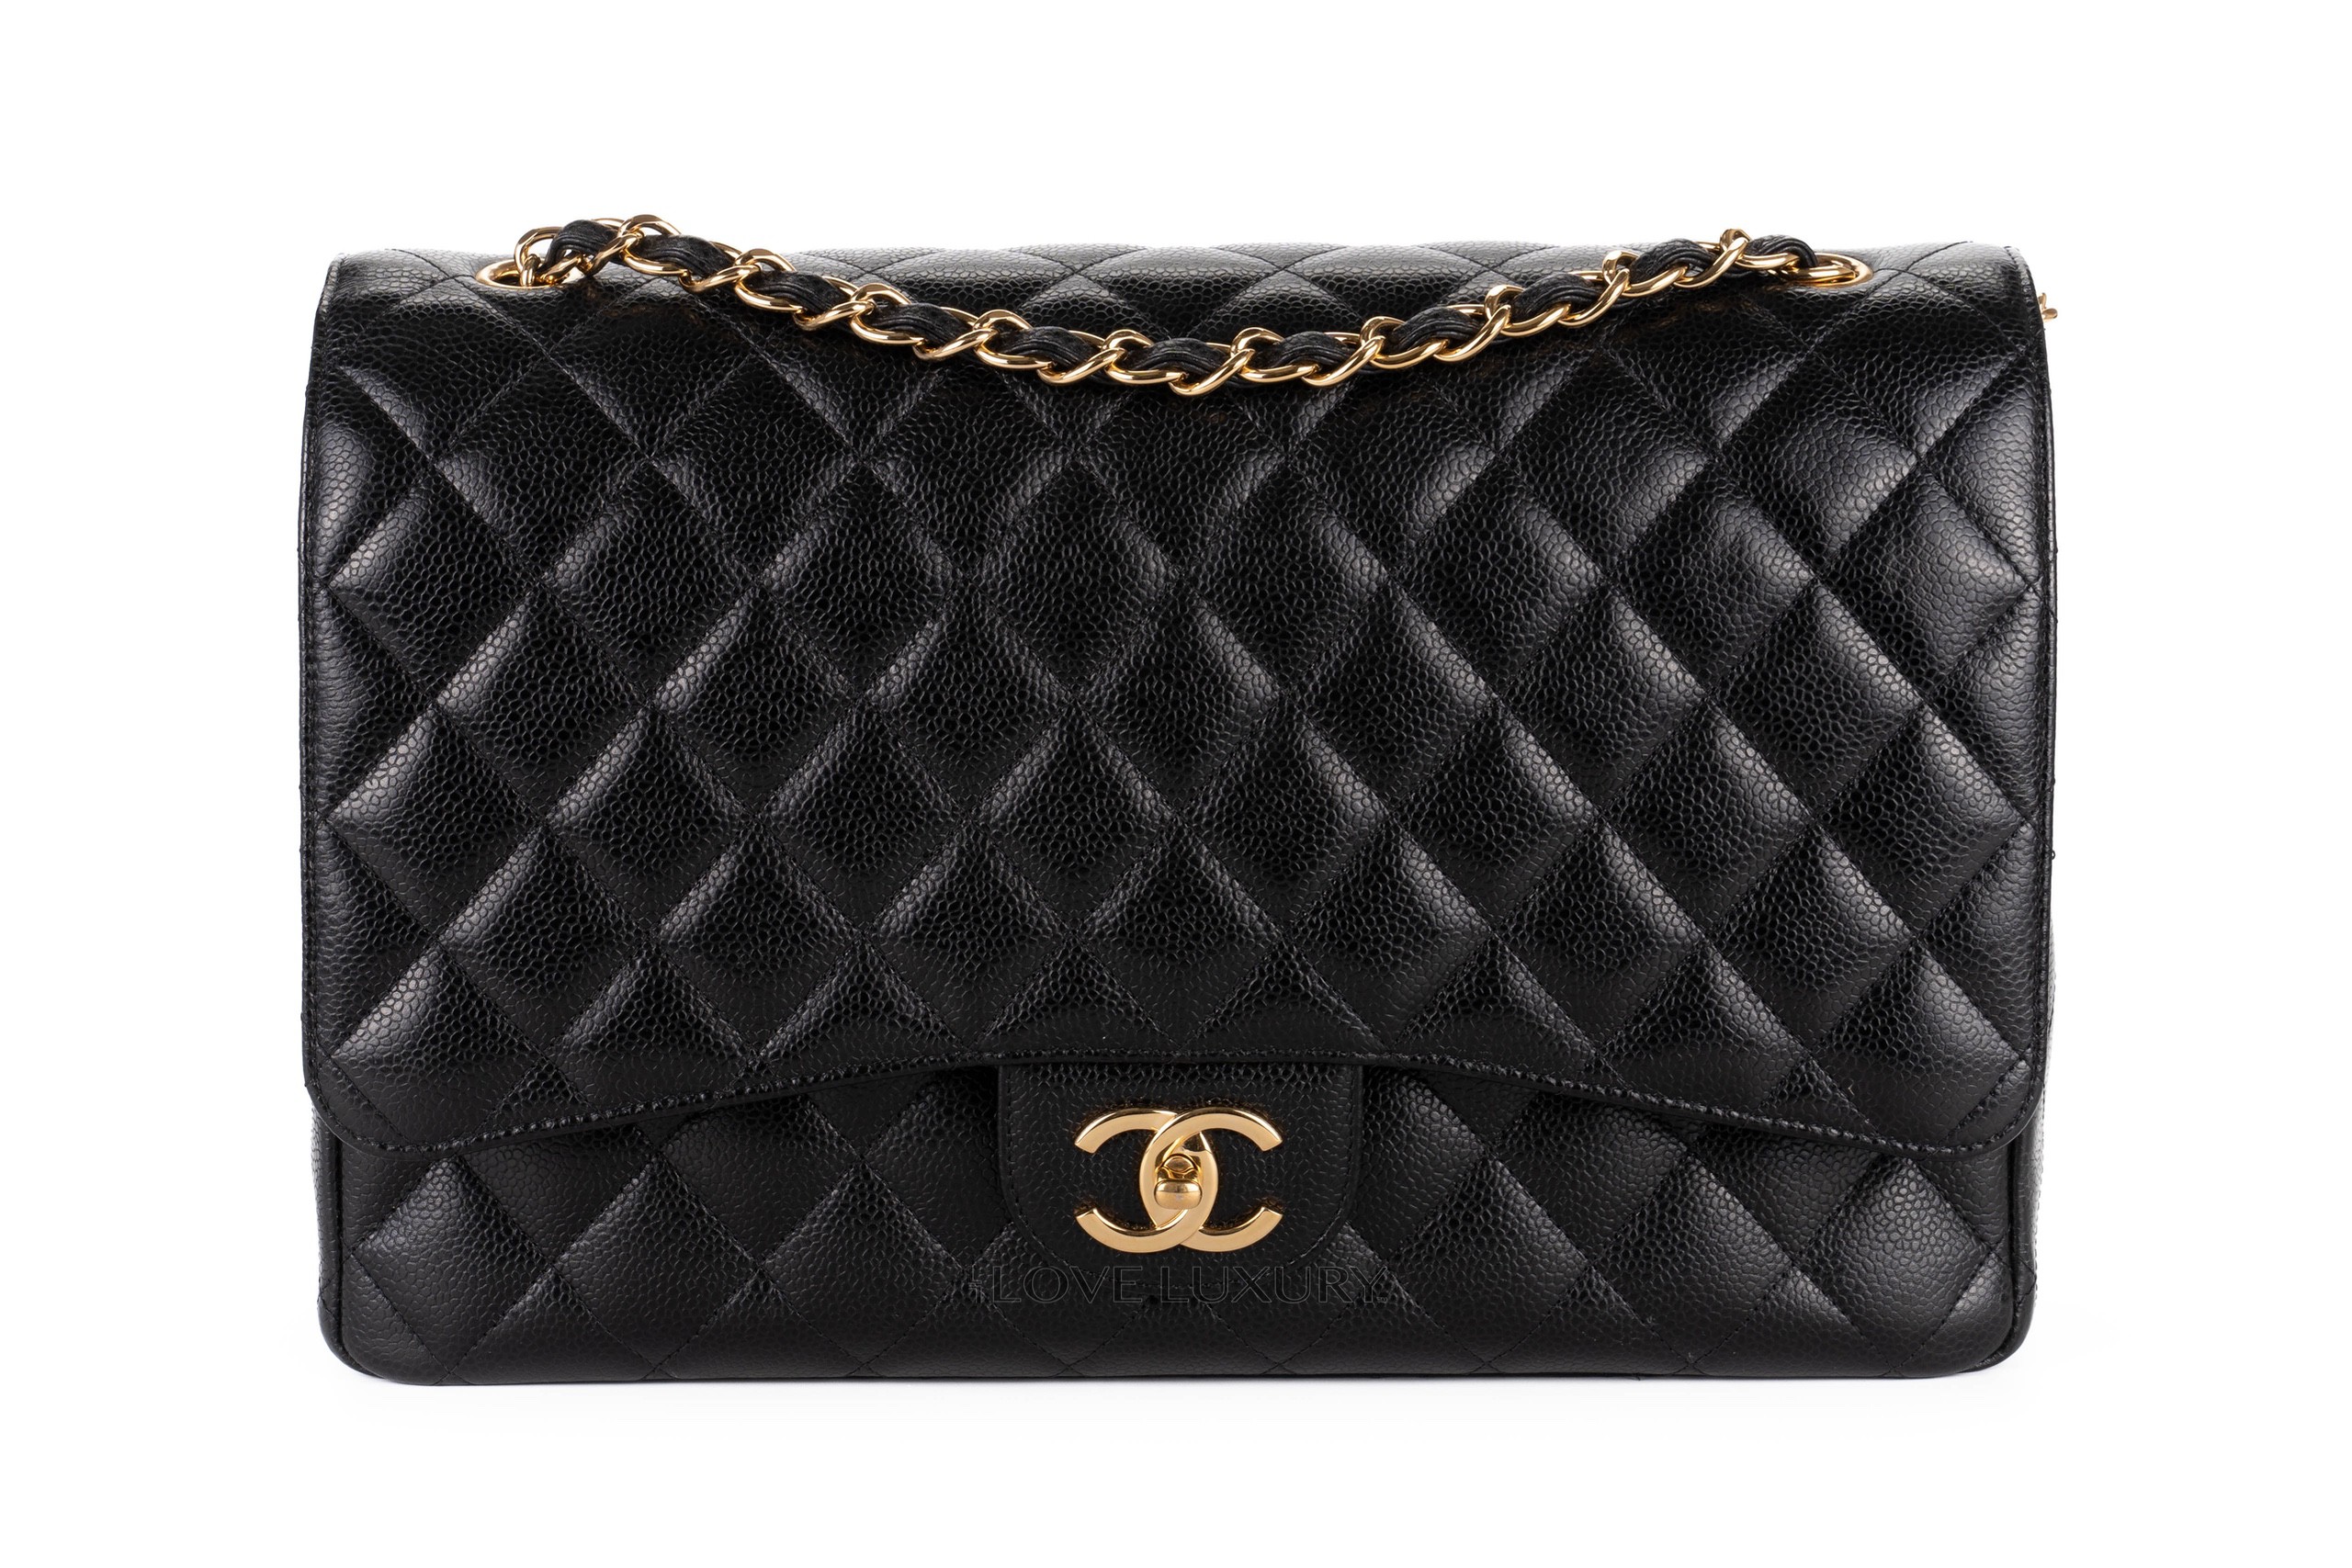 how much is a classic flap chanel bag